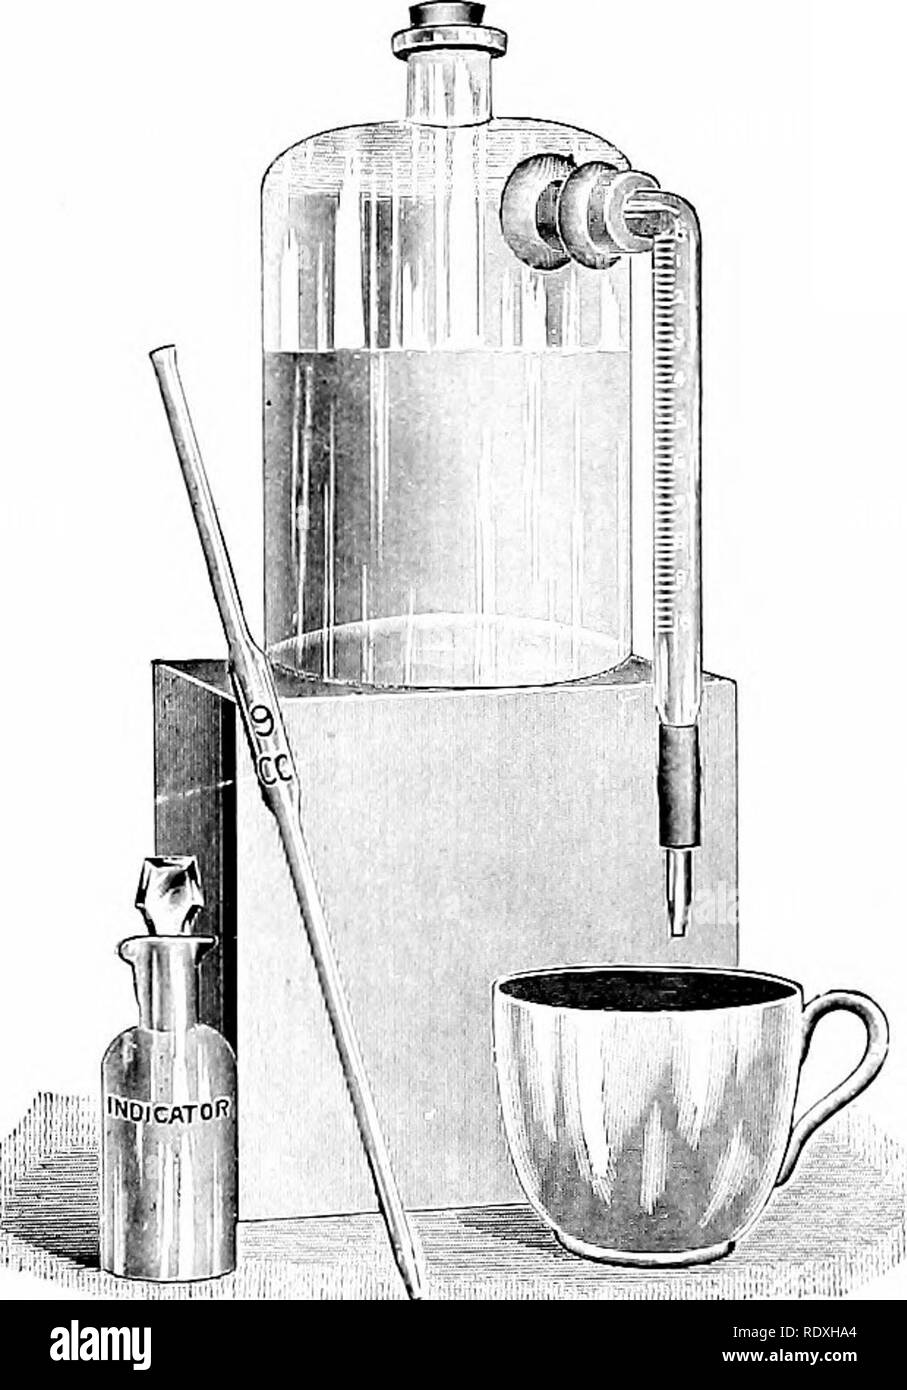 . Cheese making; cheddar, swiss, brick, limburger, Edam, cottage, etc.. Cheese. Fig. 28.—The Manns' acidimeter or acid test. Fig. 29.—The Marschall acid test. The apparatus consists of a 50 c. c. burette, a solution of phe- nolphtalein, a Babcock pipette, and a tenth-normal alkali solu- tion. &quot;When a pipette of milk or whey is used 1 c. c. of the alkali used is equal to .05 per cent of lactic acid. The Farrington tablet solution* may be substituted for the alkali solution. Use 19.5 c. c. of water for each tablet. Each c. c. of the solution used will be equal to .01 per cent of lactic acid Stock Photo